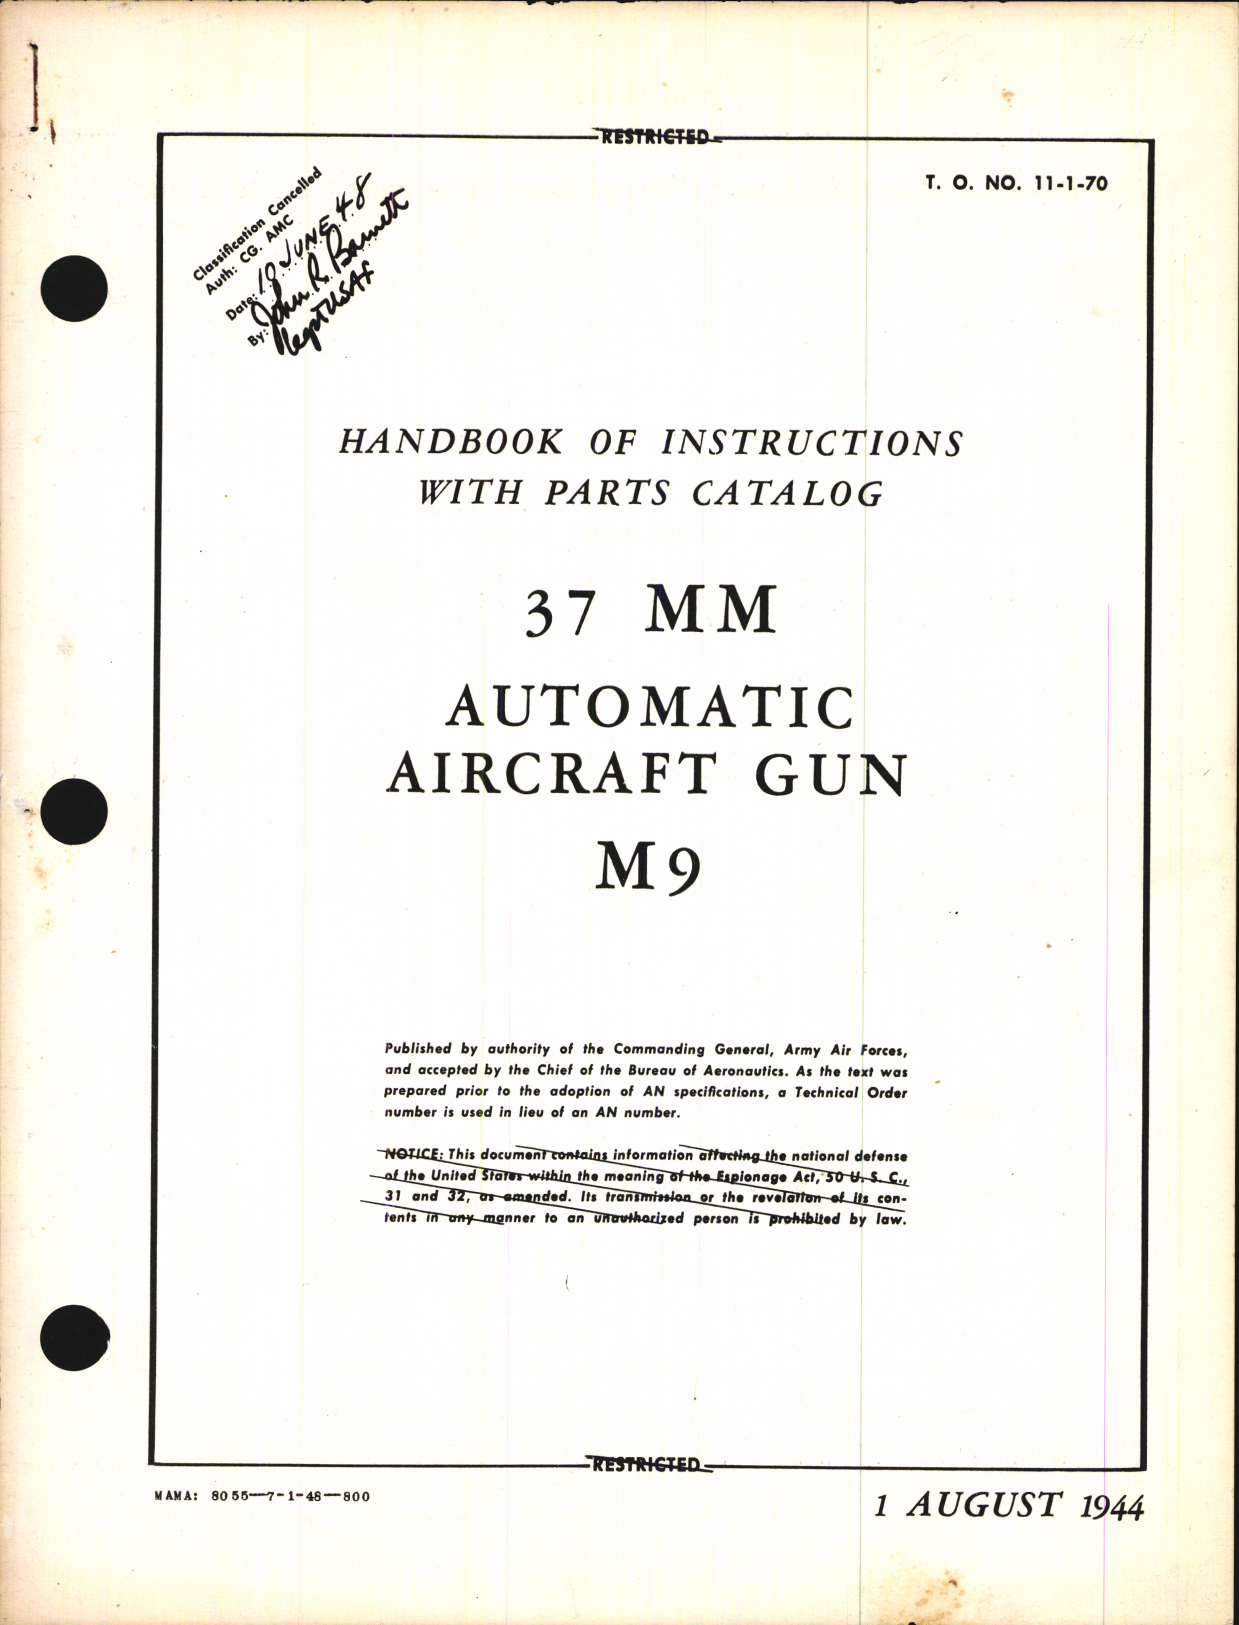 Sample page 1 from AirCorps Library document: Handbook of Instructions with Parts Catalog for 37 MM Automatic Aircraft Gun M9